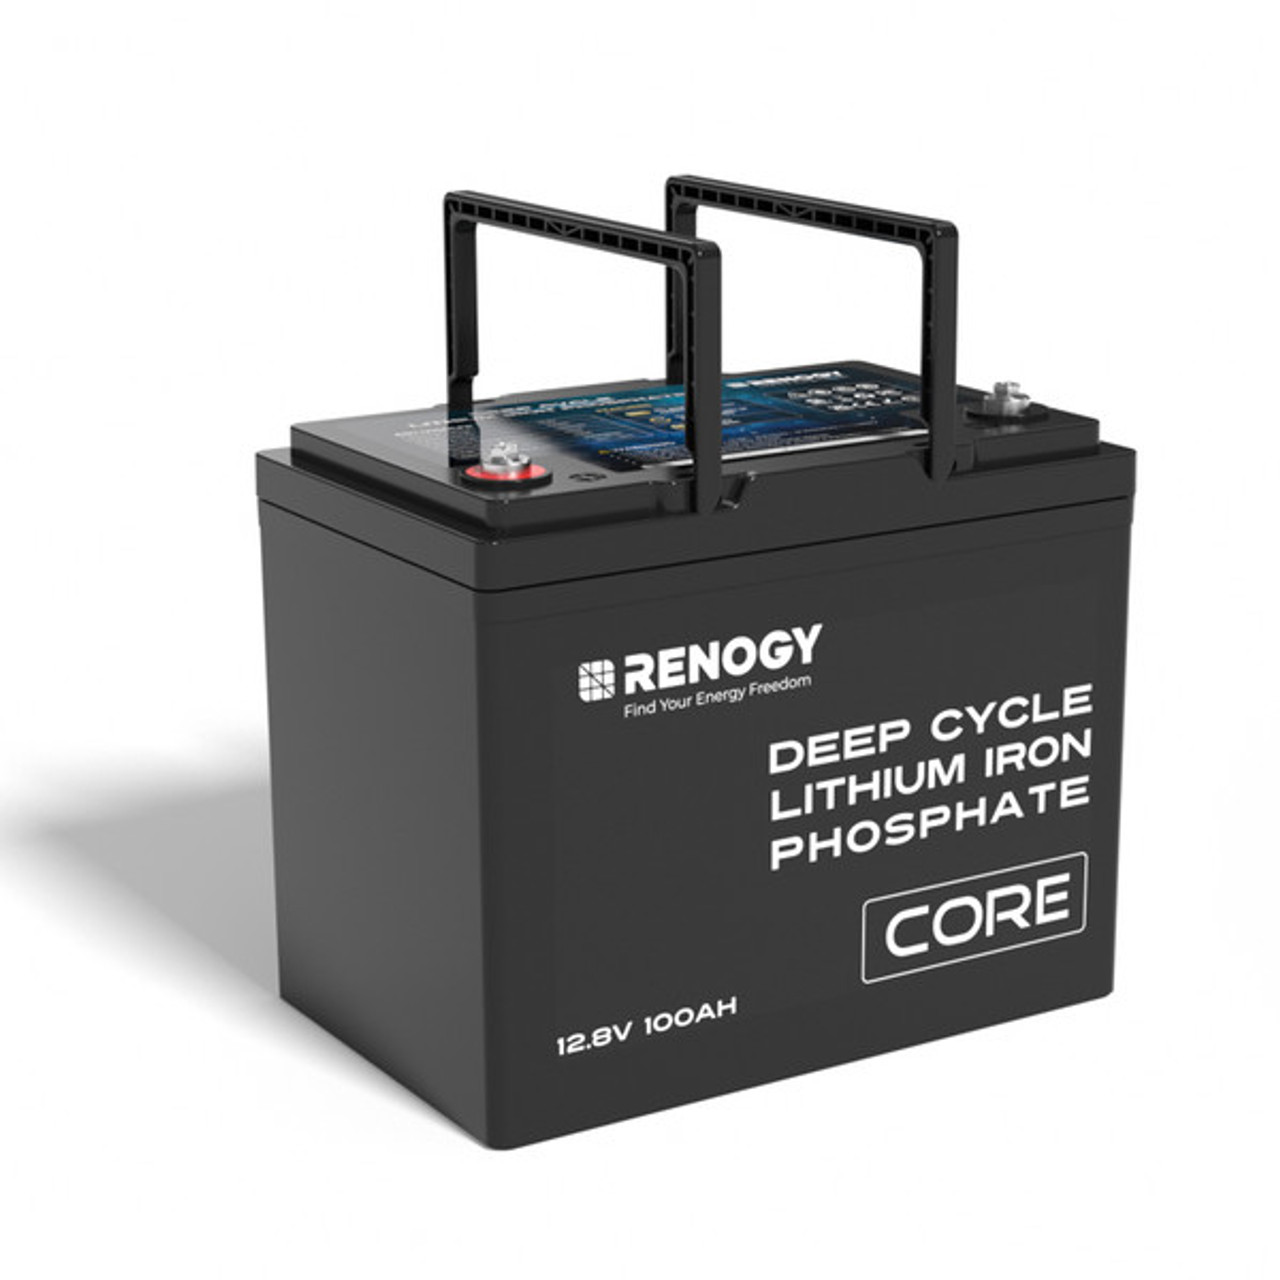 Deep Cycle 51.2V 100ah Low Voltage Solar Battery High Capacity